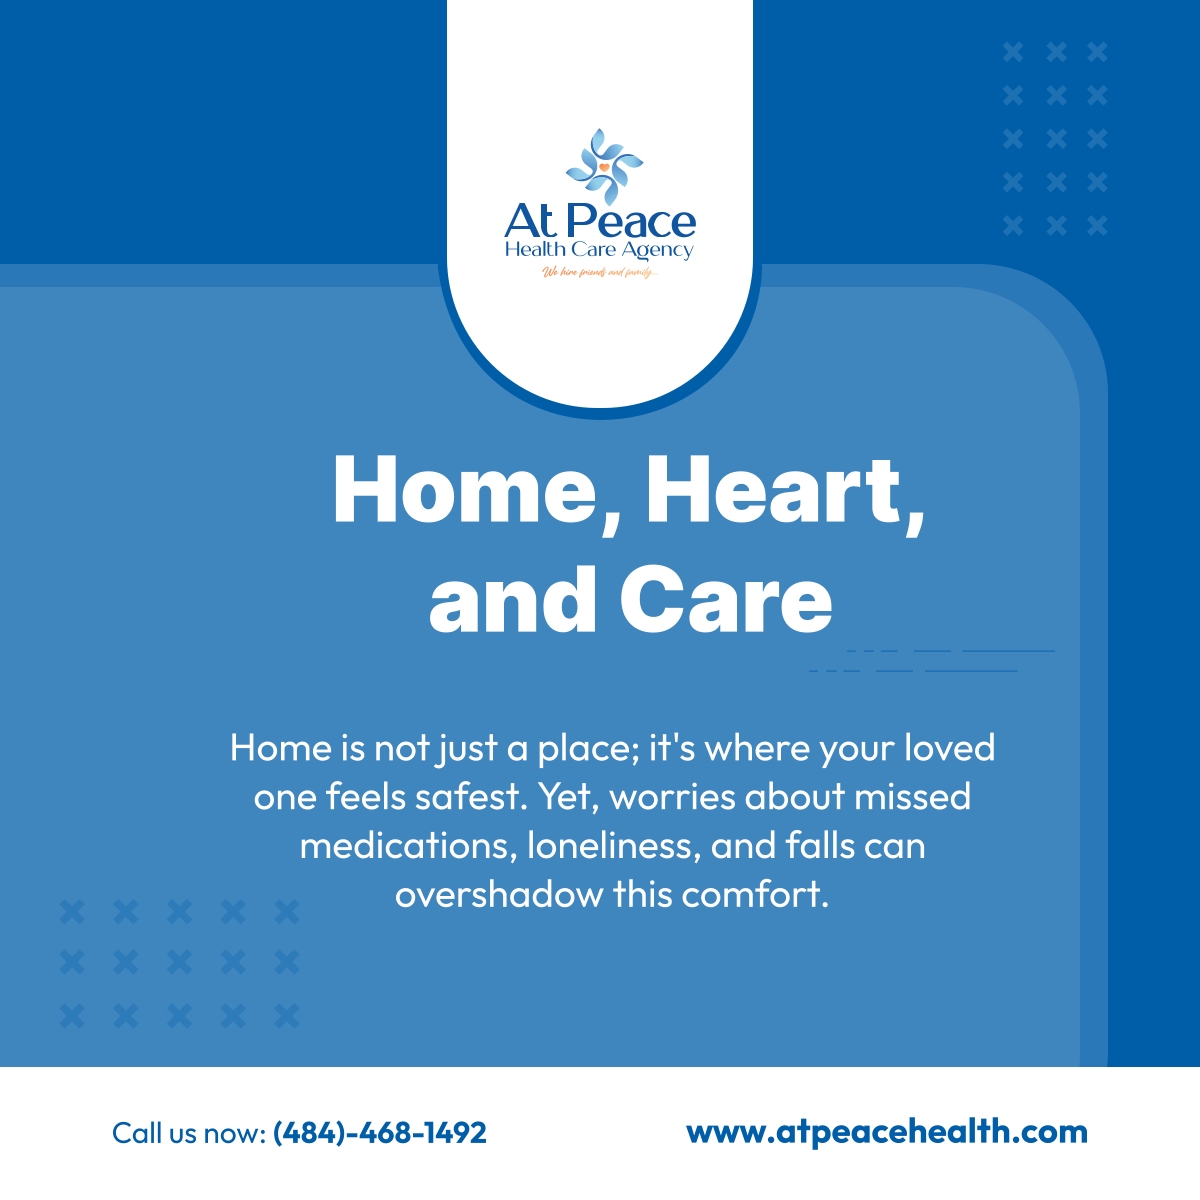 Did you know home is the preferred place for healing and living among seniors? Let's address the common concerns together, making home the safest haven at At Peace Health Care Agency. 

#PhiladelphiaPA #HomeHealthCare #SeniorSafety